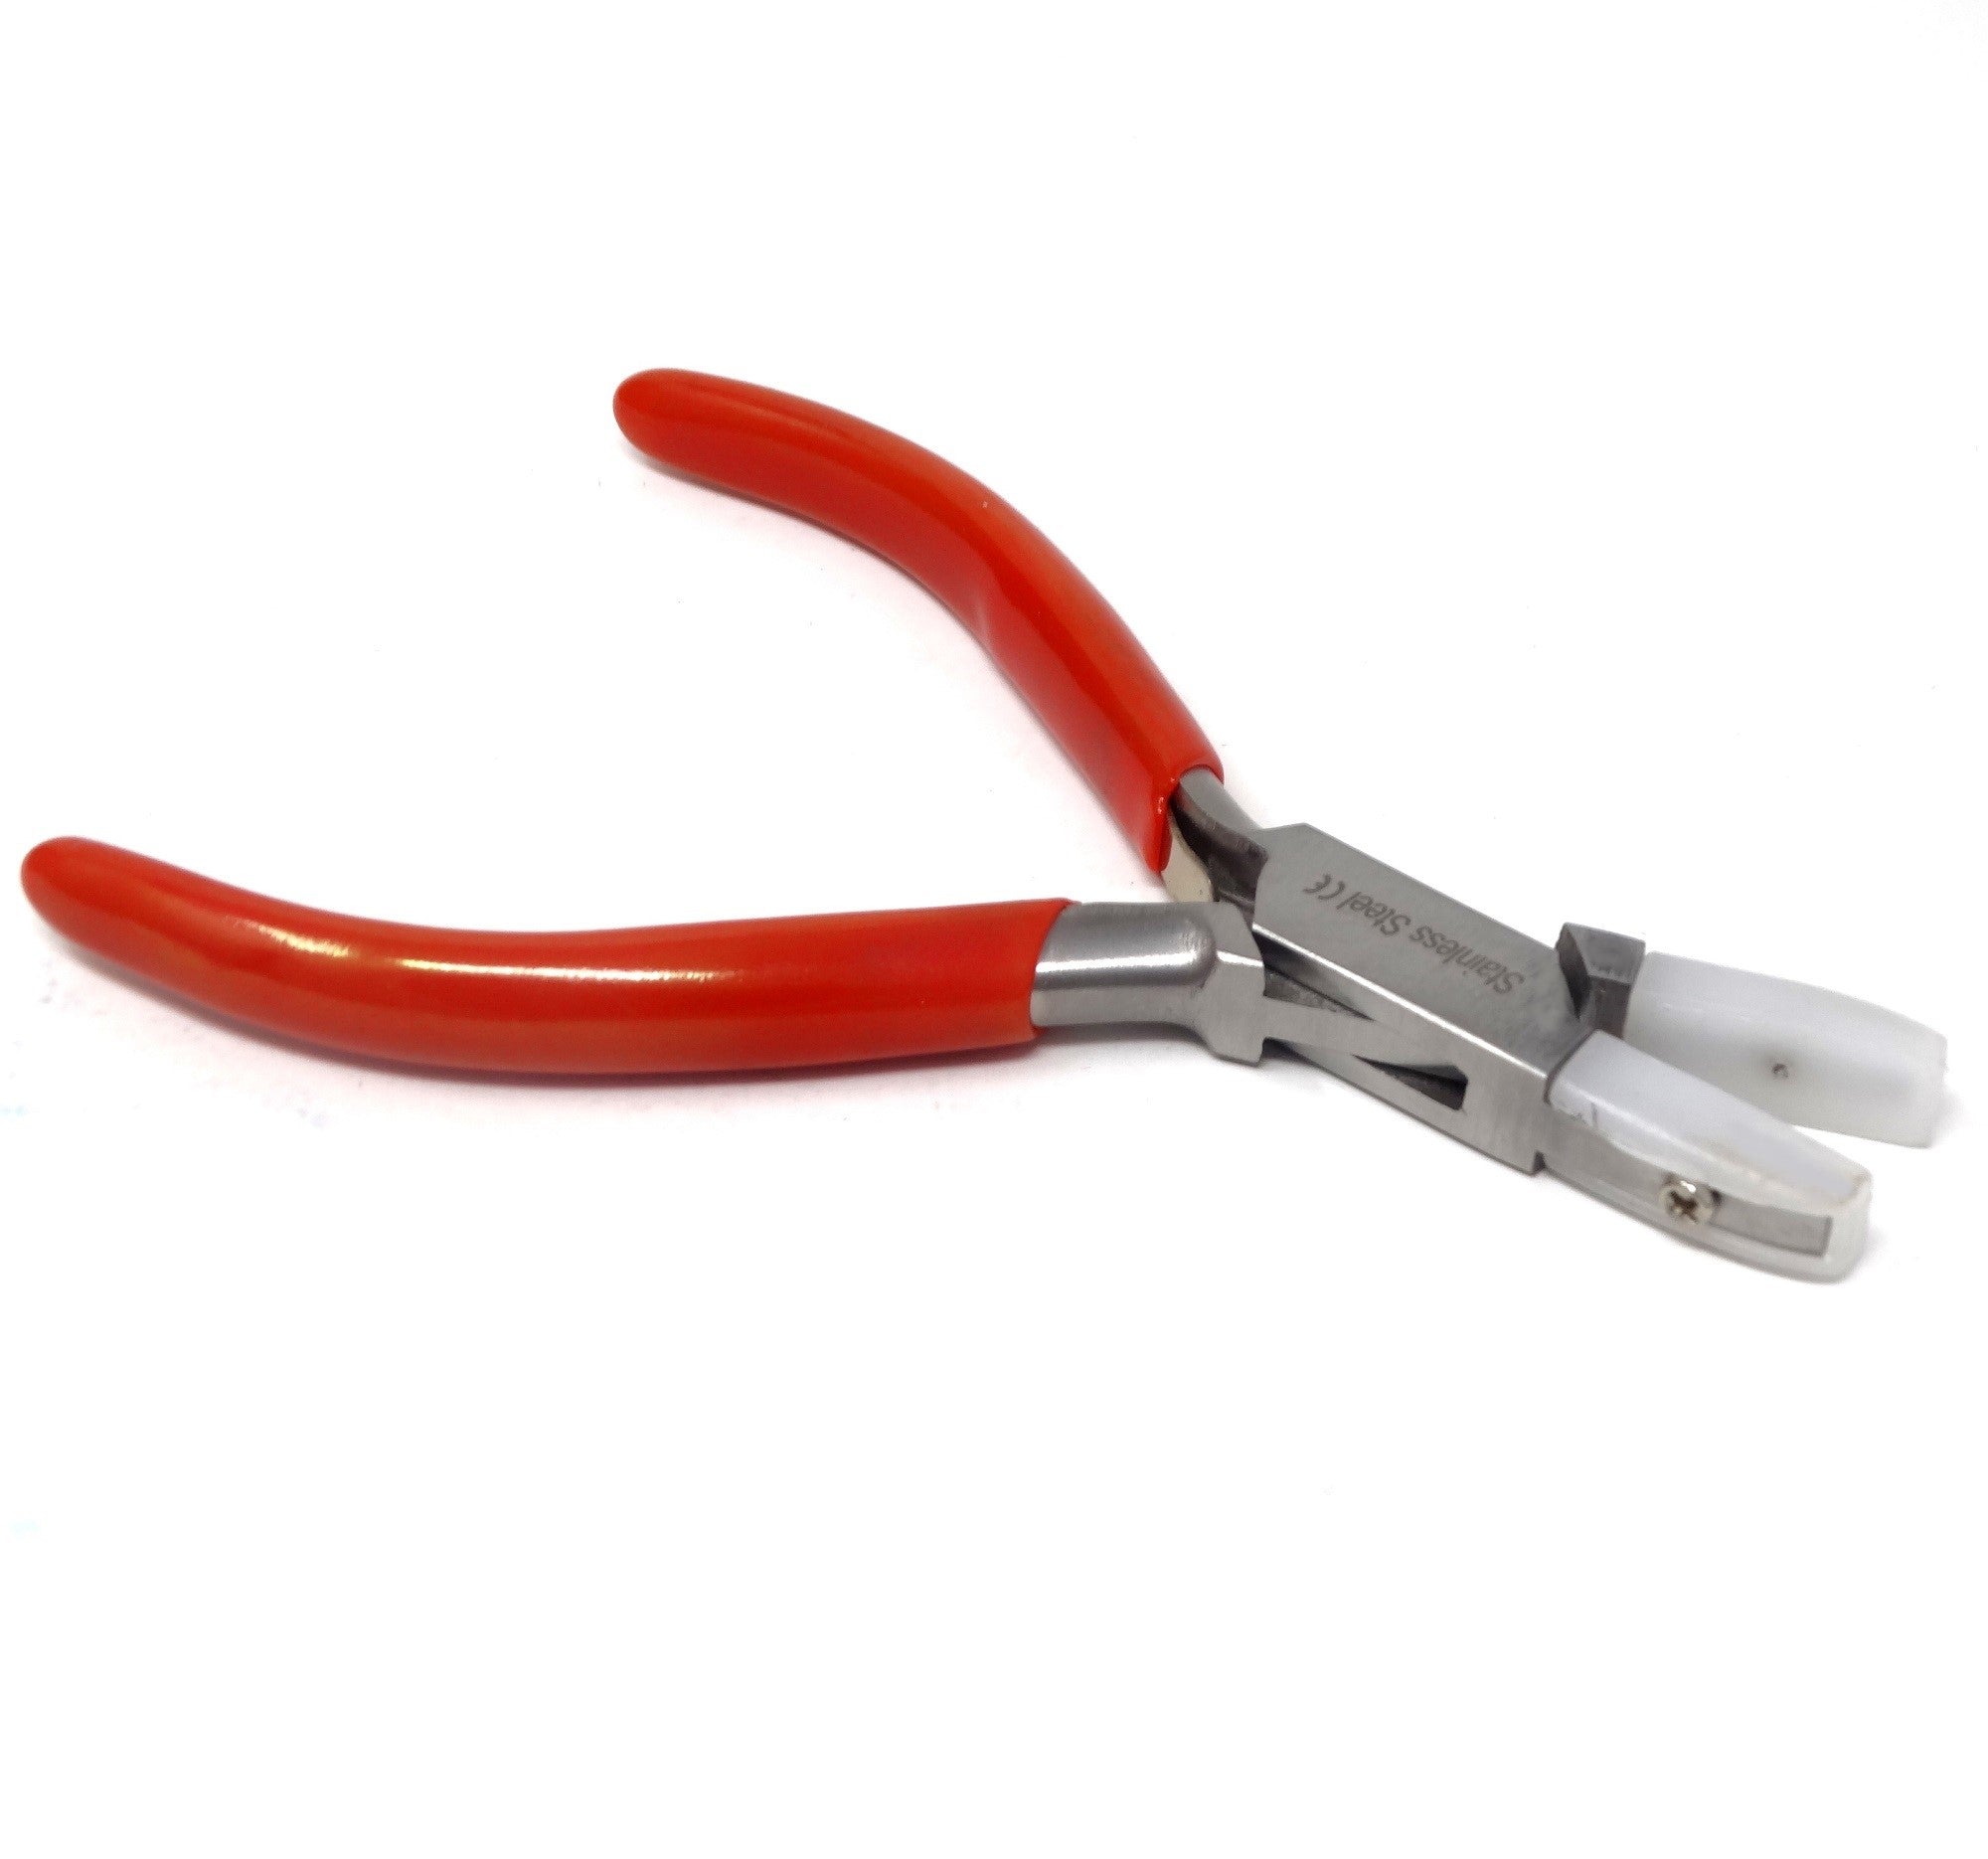 Professional Stainless Steel Prevent Injury Flat Nylon Jaw Pliers for DIY  Jewelry Tools